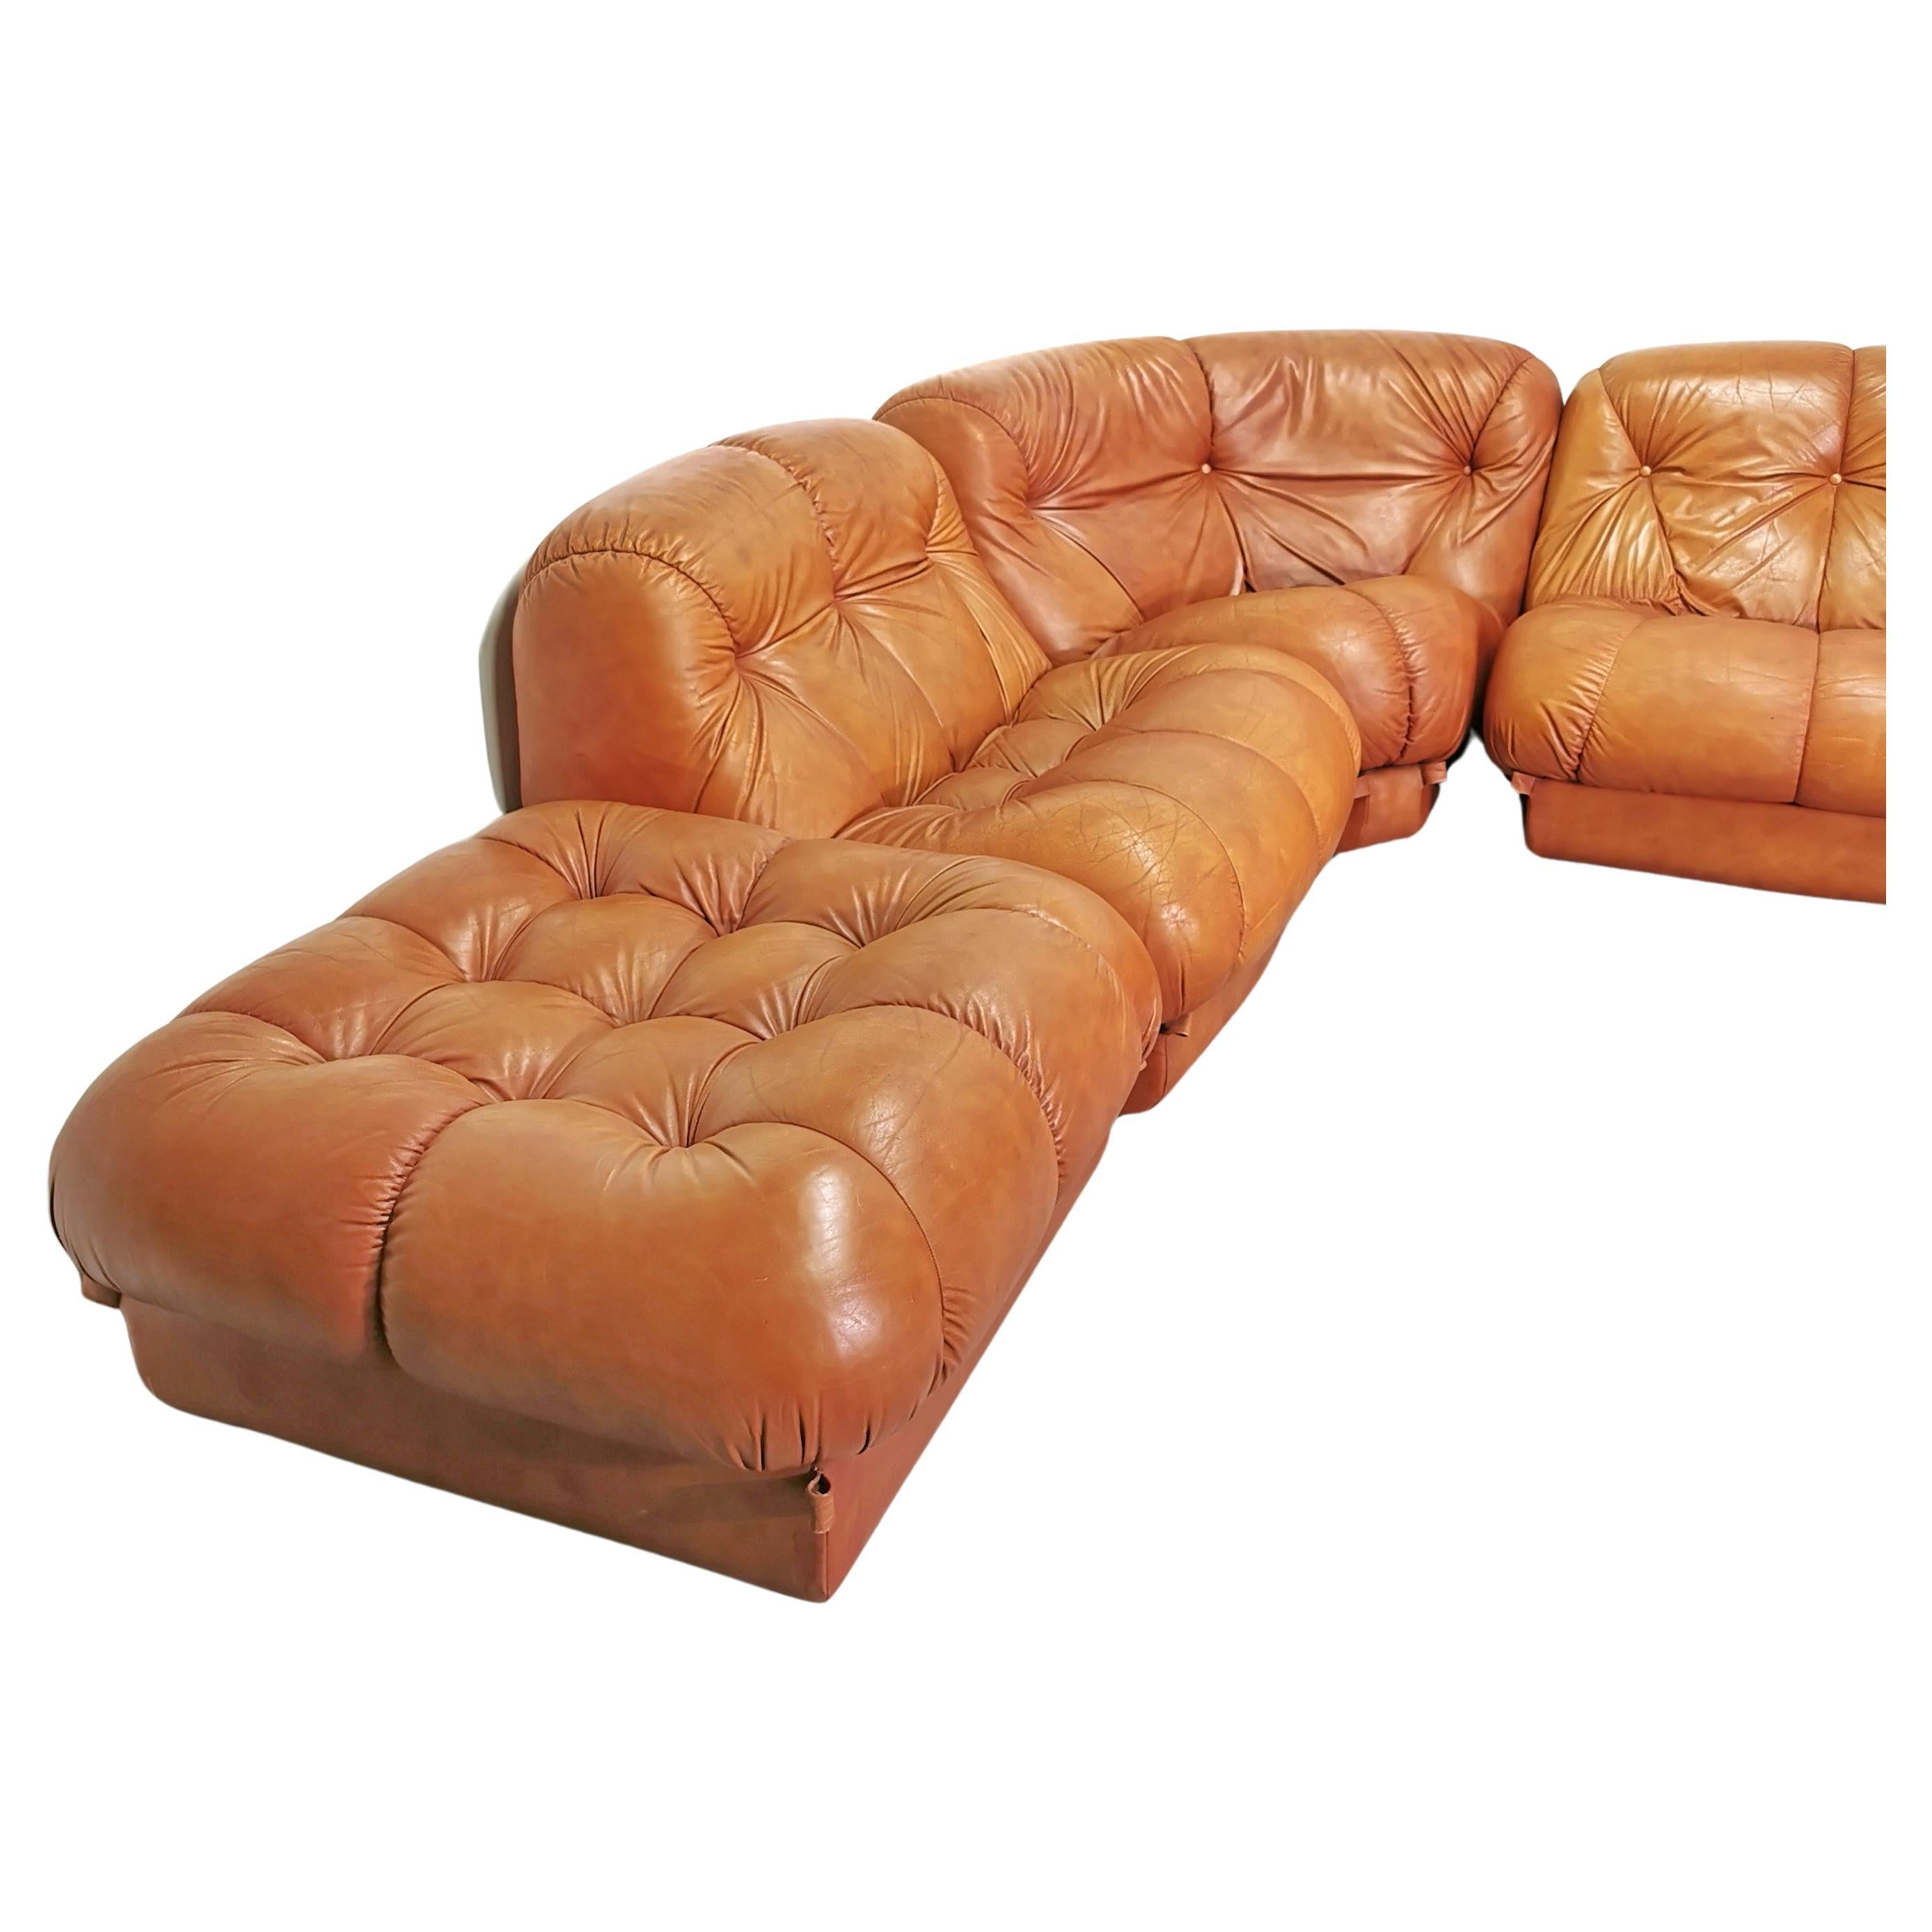 Modular cognaq leather sofa Nuvolone model designed in the 1970s by Rino Maturi for Mimo Design. the sofa is composed of  by 5 seats including 1 ottoman and a corner module. the Sofa is in very good condition with minor signs of time.
has no plastic